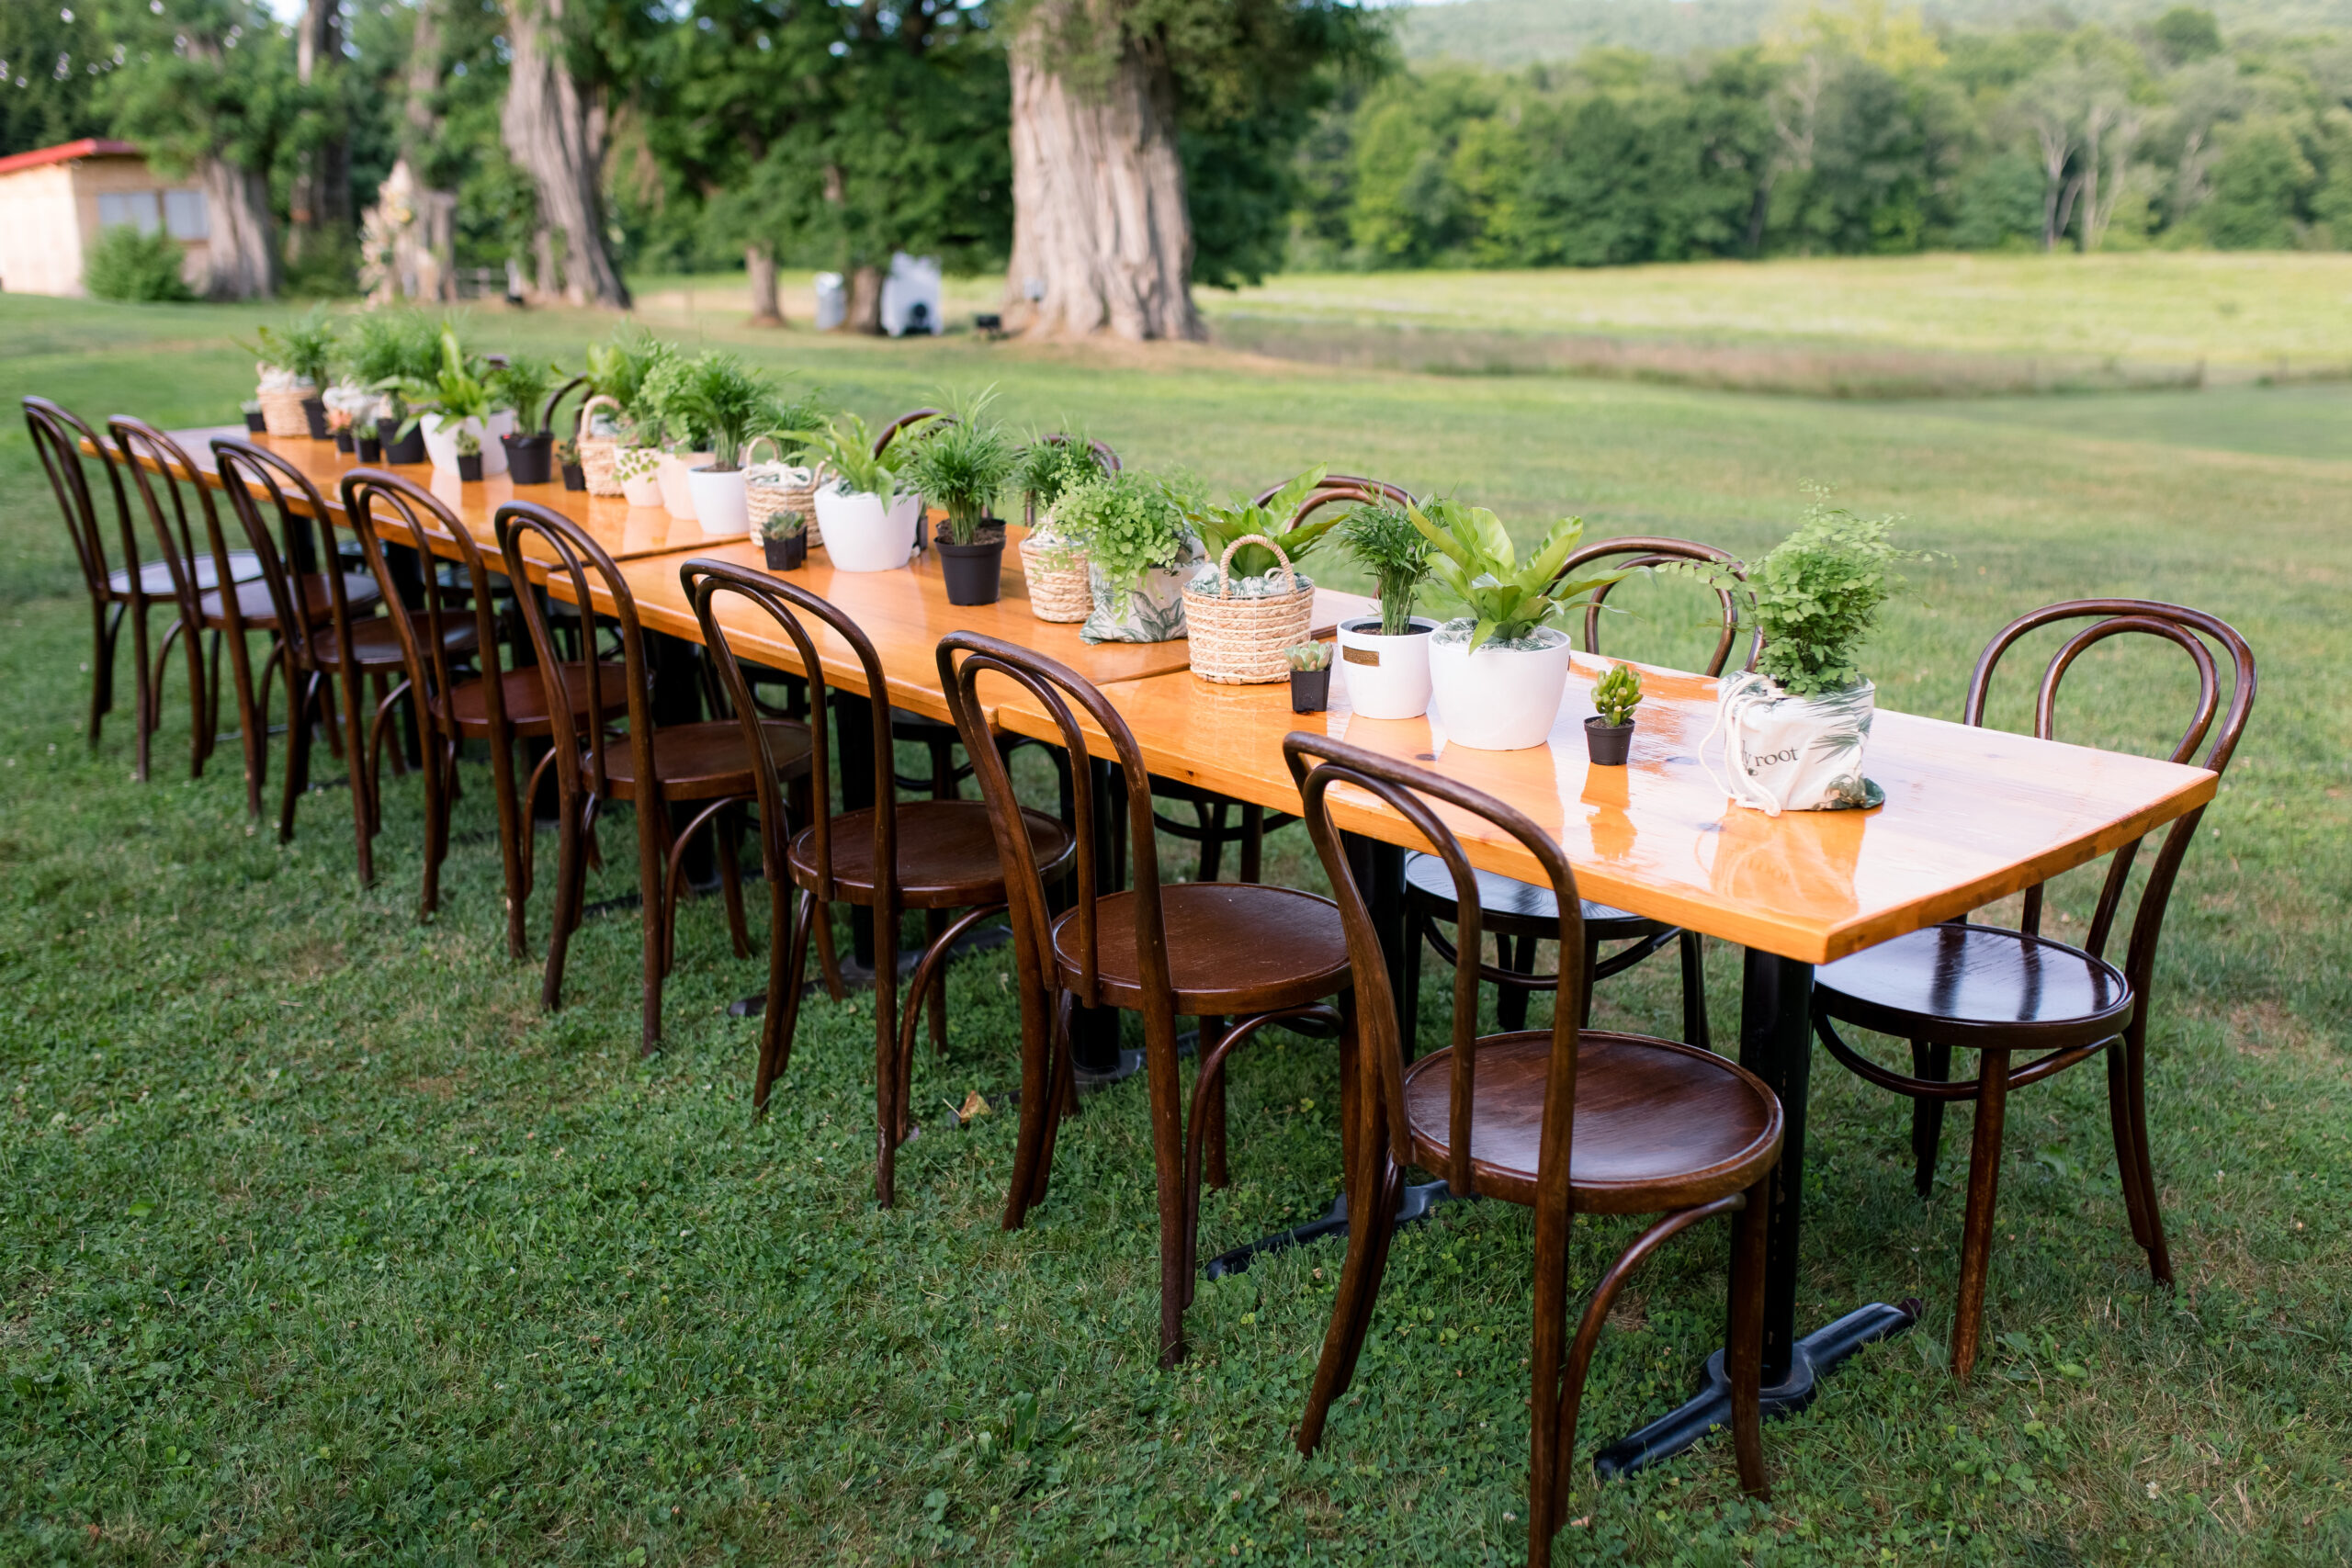 long table with green plants down middle for centerpiece